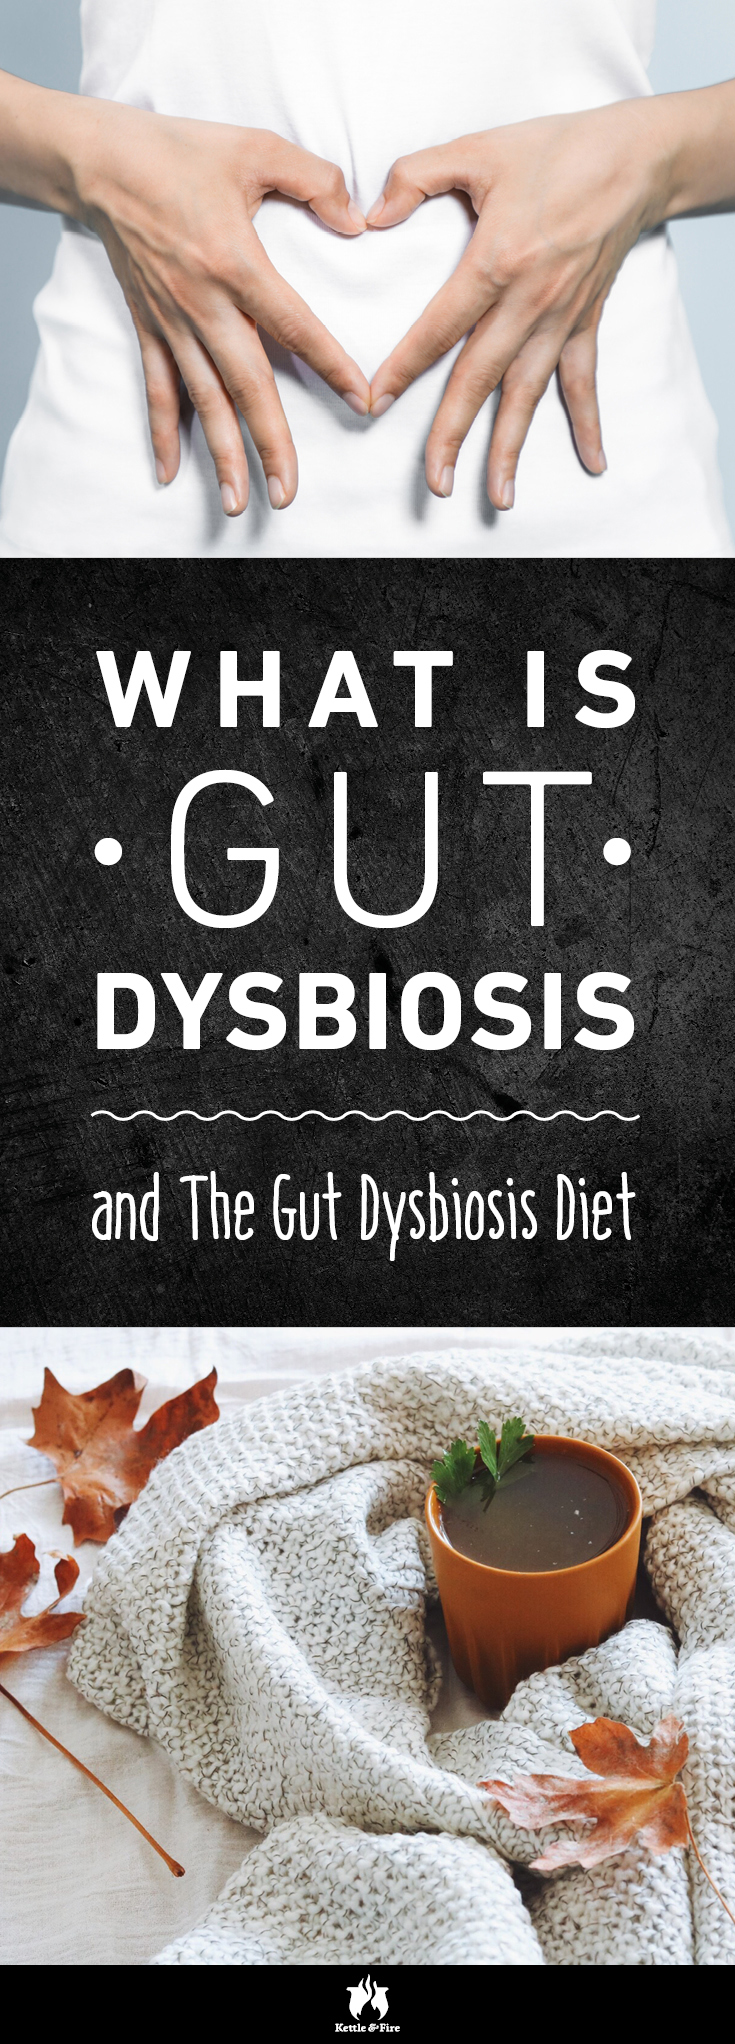 Acne? Allergies? Autoimmune conditions? Your symptoms could be caused by a bacterial condition that affects 30 million Americans, called gut dysbiosis.